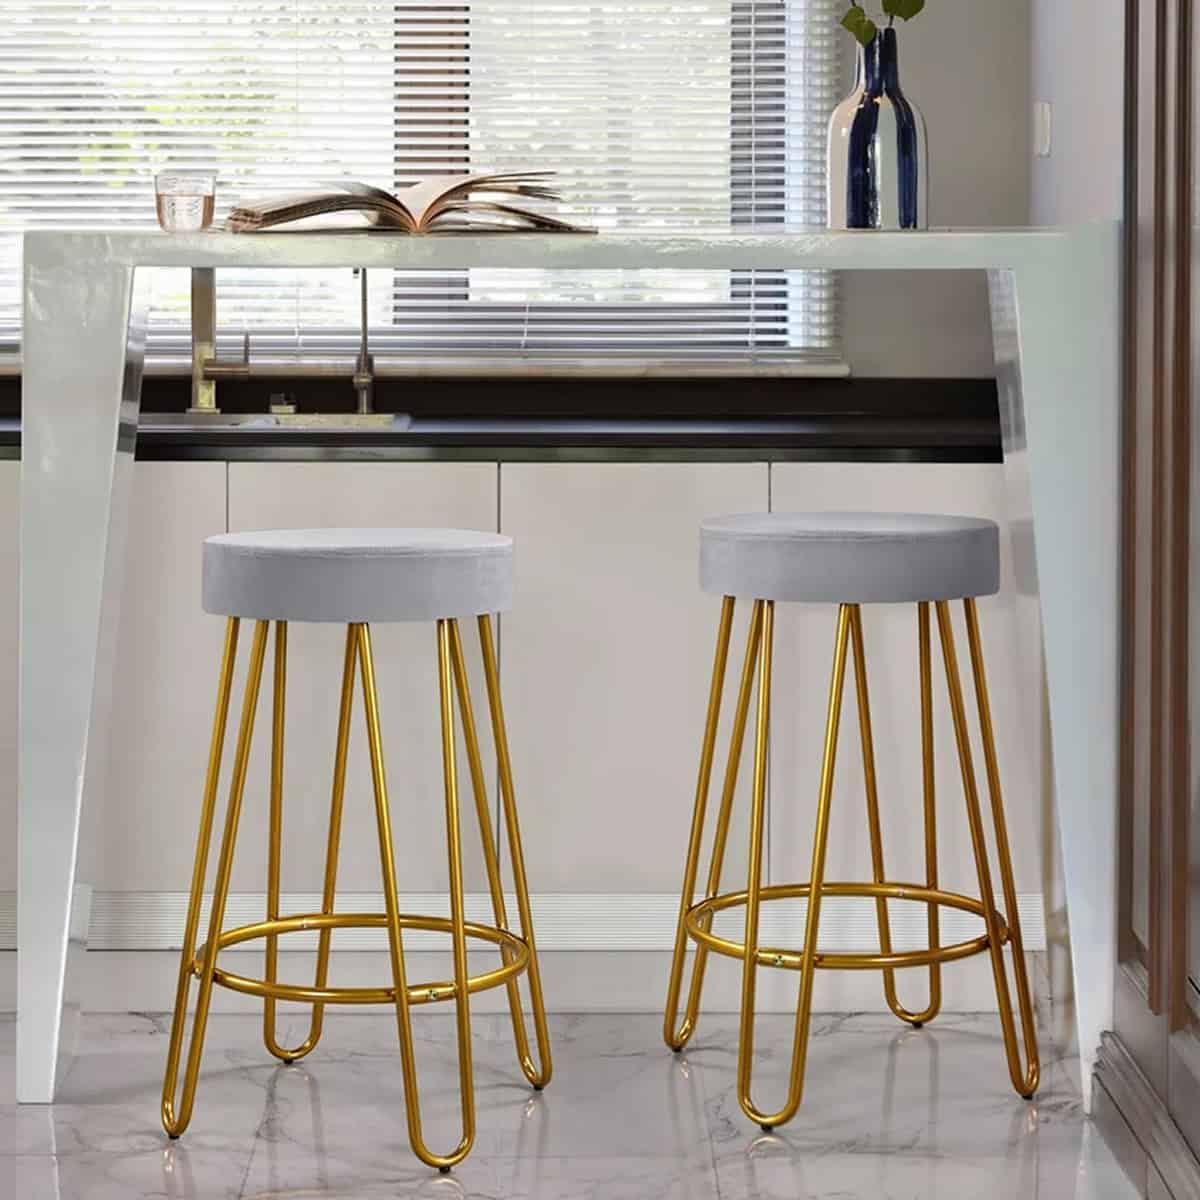 gold backless stools under a counter.